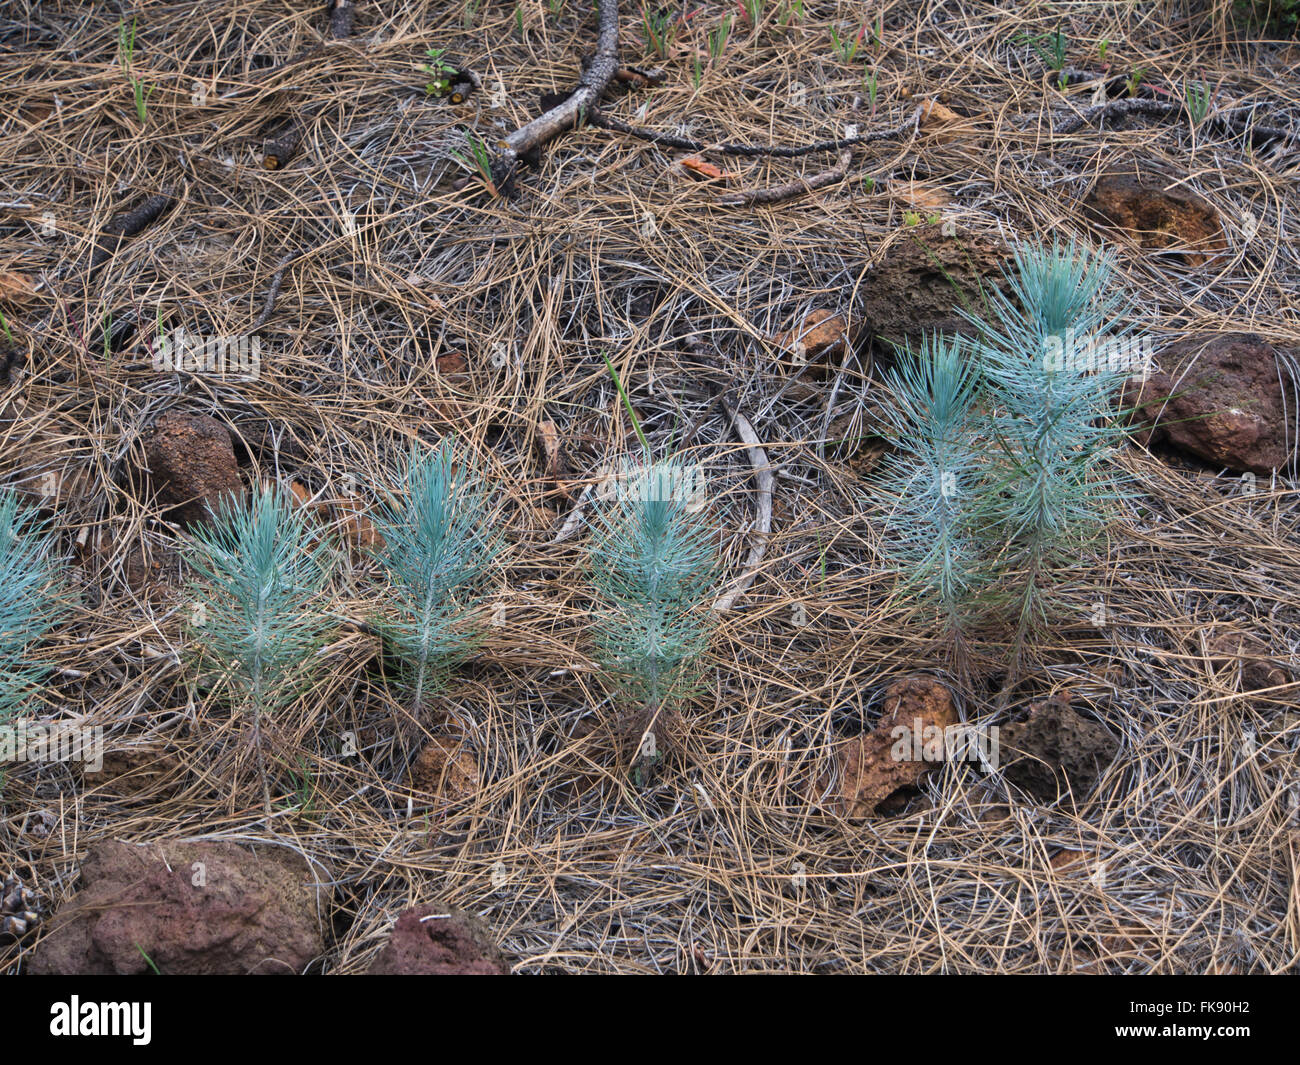 the Canary Island pine, Pinus canariensis, young saplings by a footpath in Tenerife, Spain characteristic glaucous in colour Stock Photo